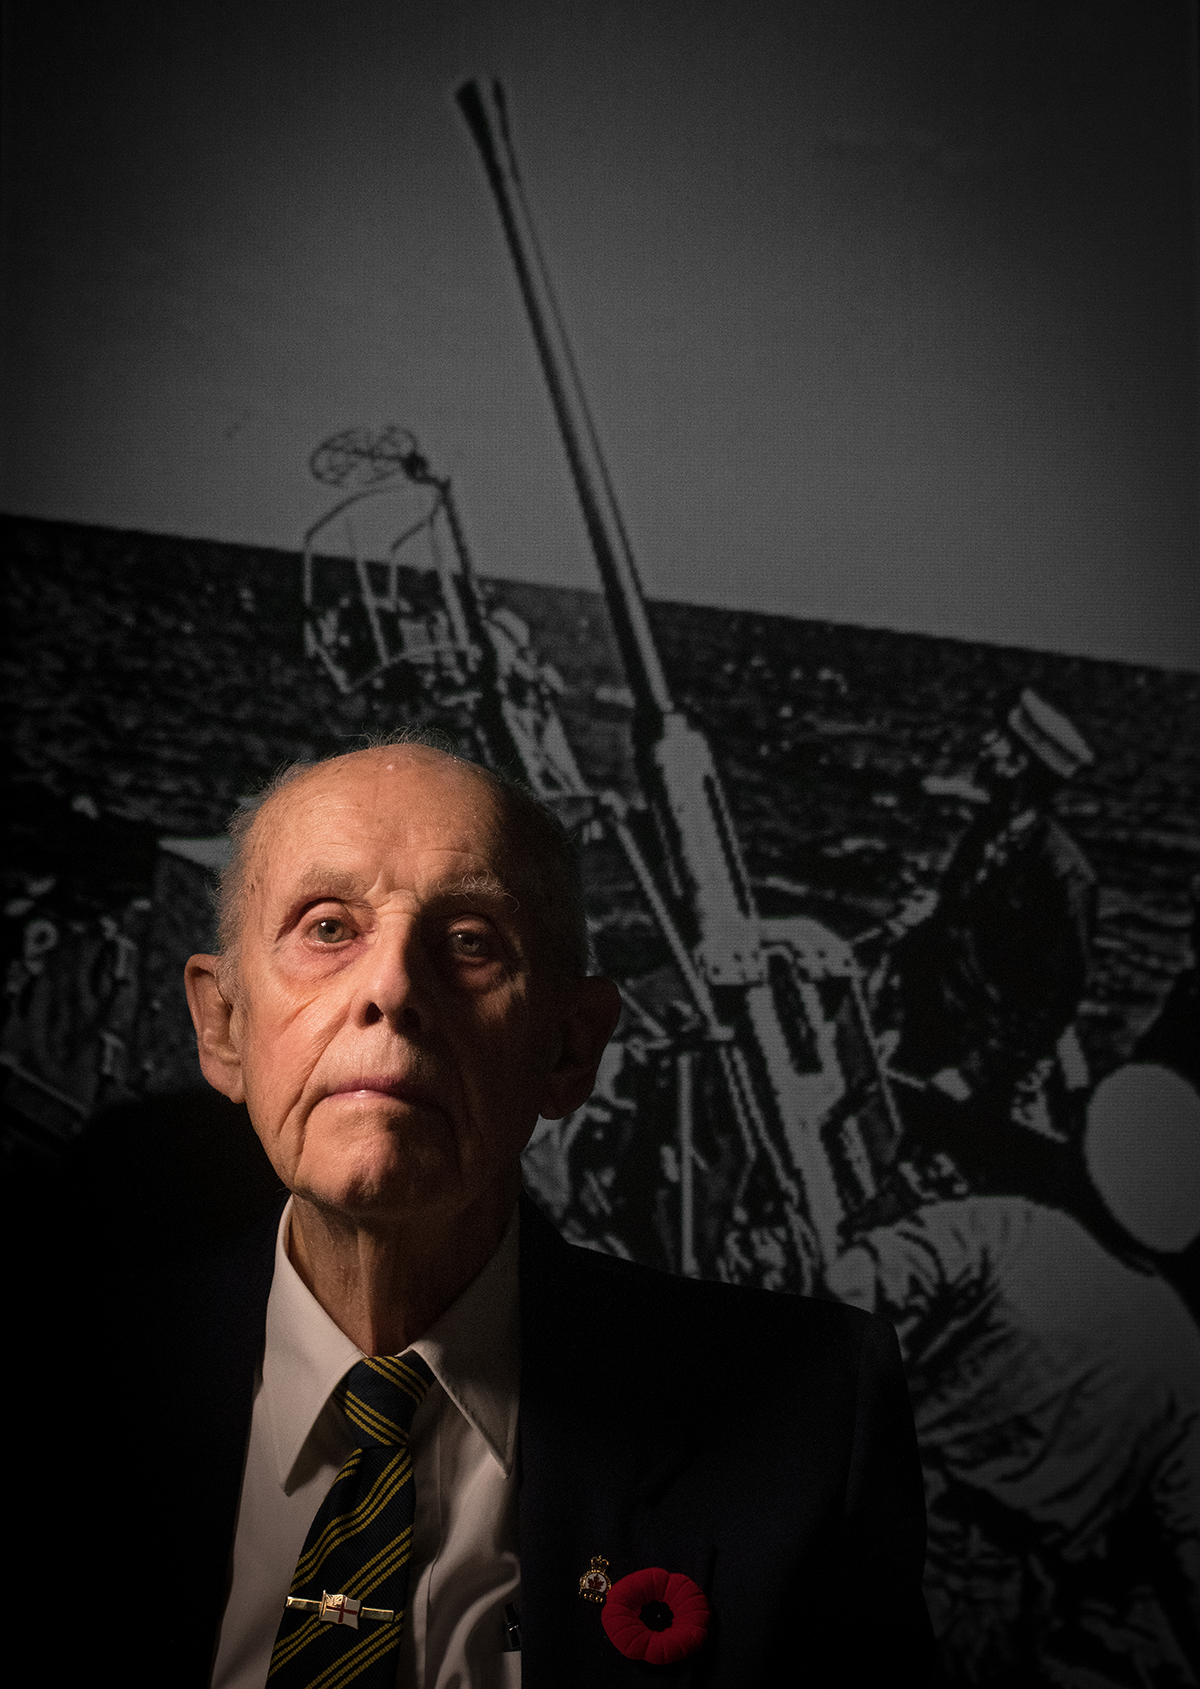 Jim Lister is photographed in front of an image of himself taken during the war times.